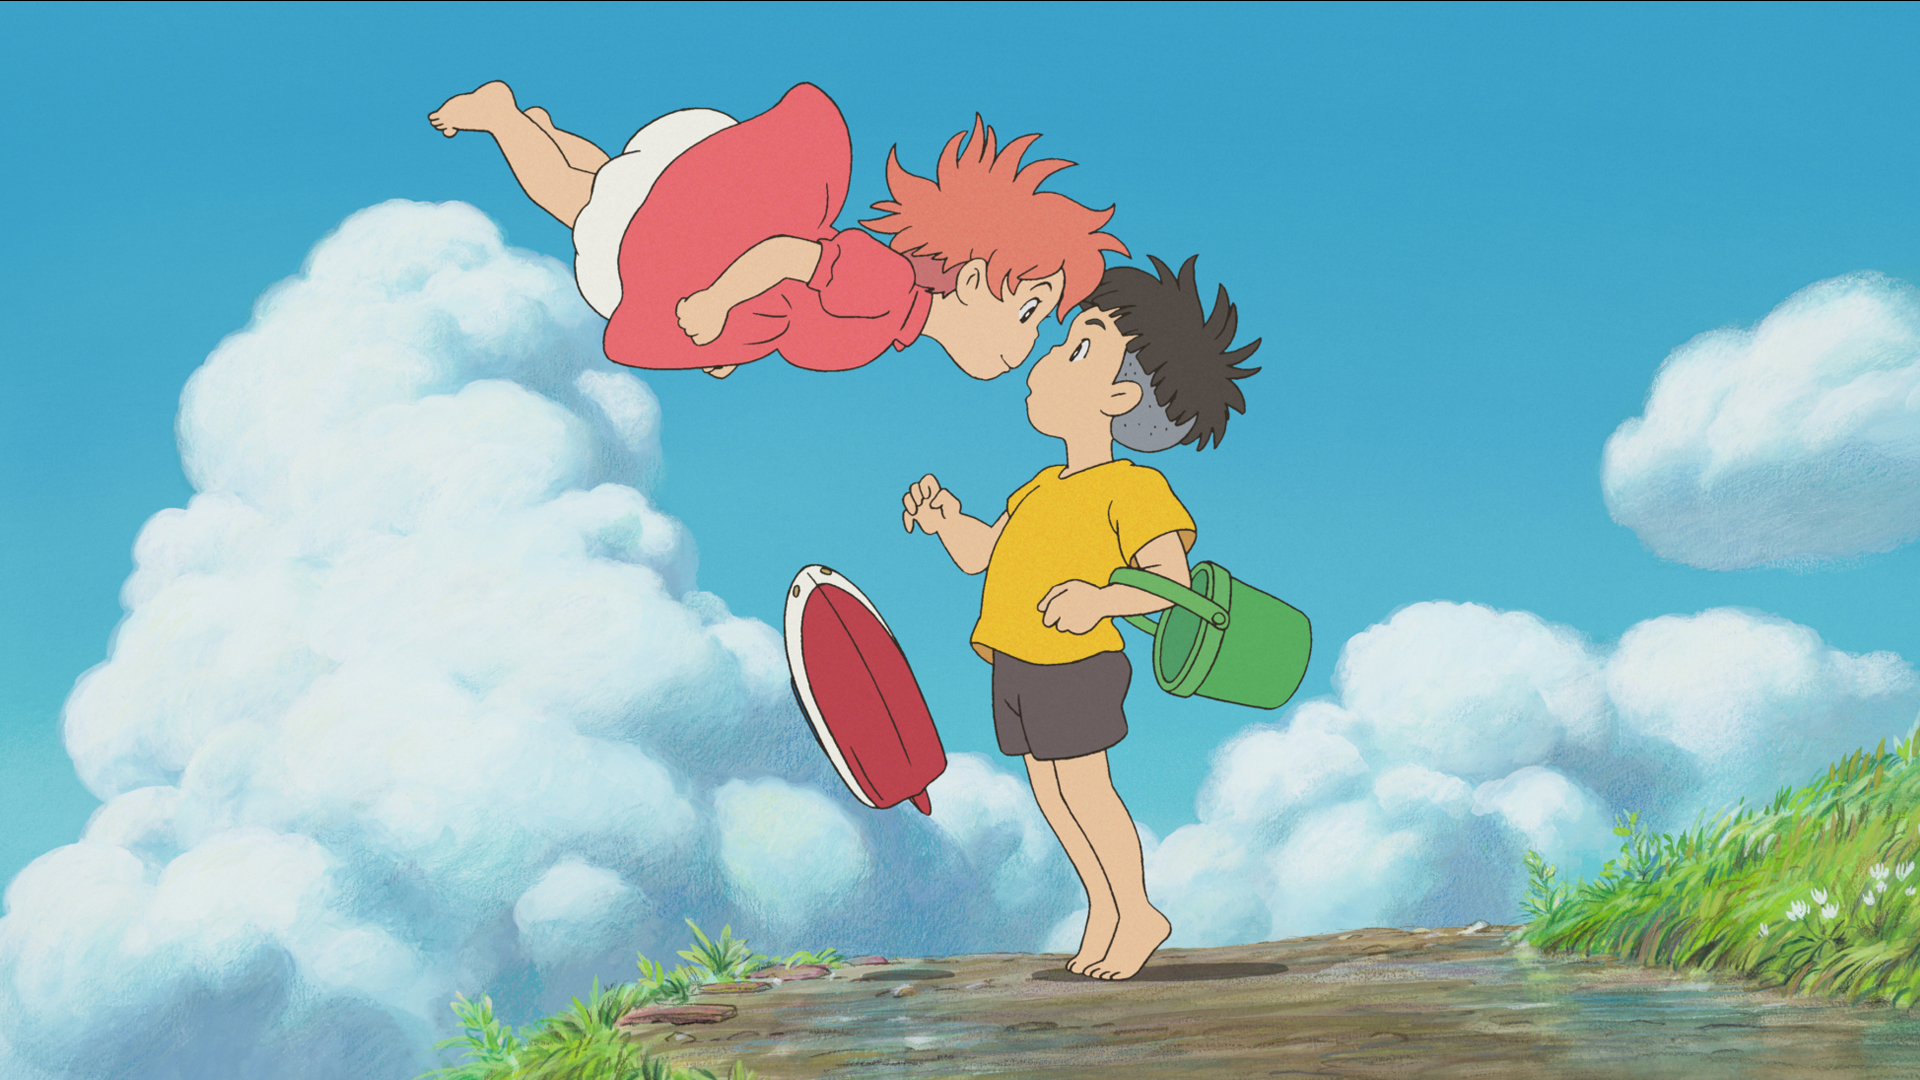 Good Ol’ Review: A Heartwarming and Magical Adventure for Miyazaki’s “Ponyo”